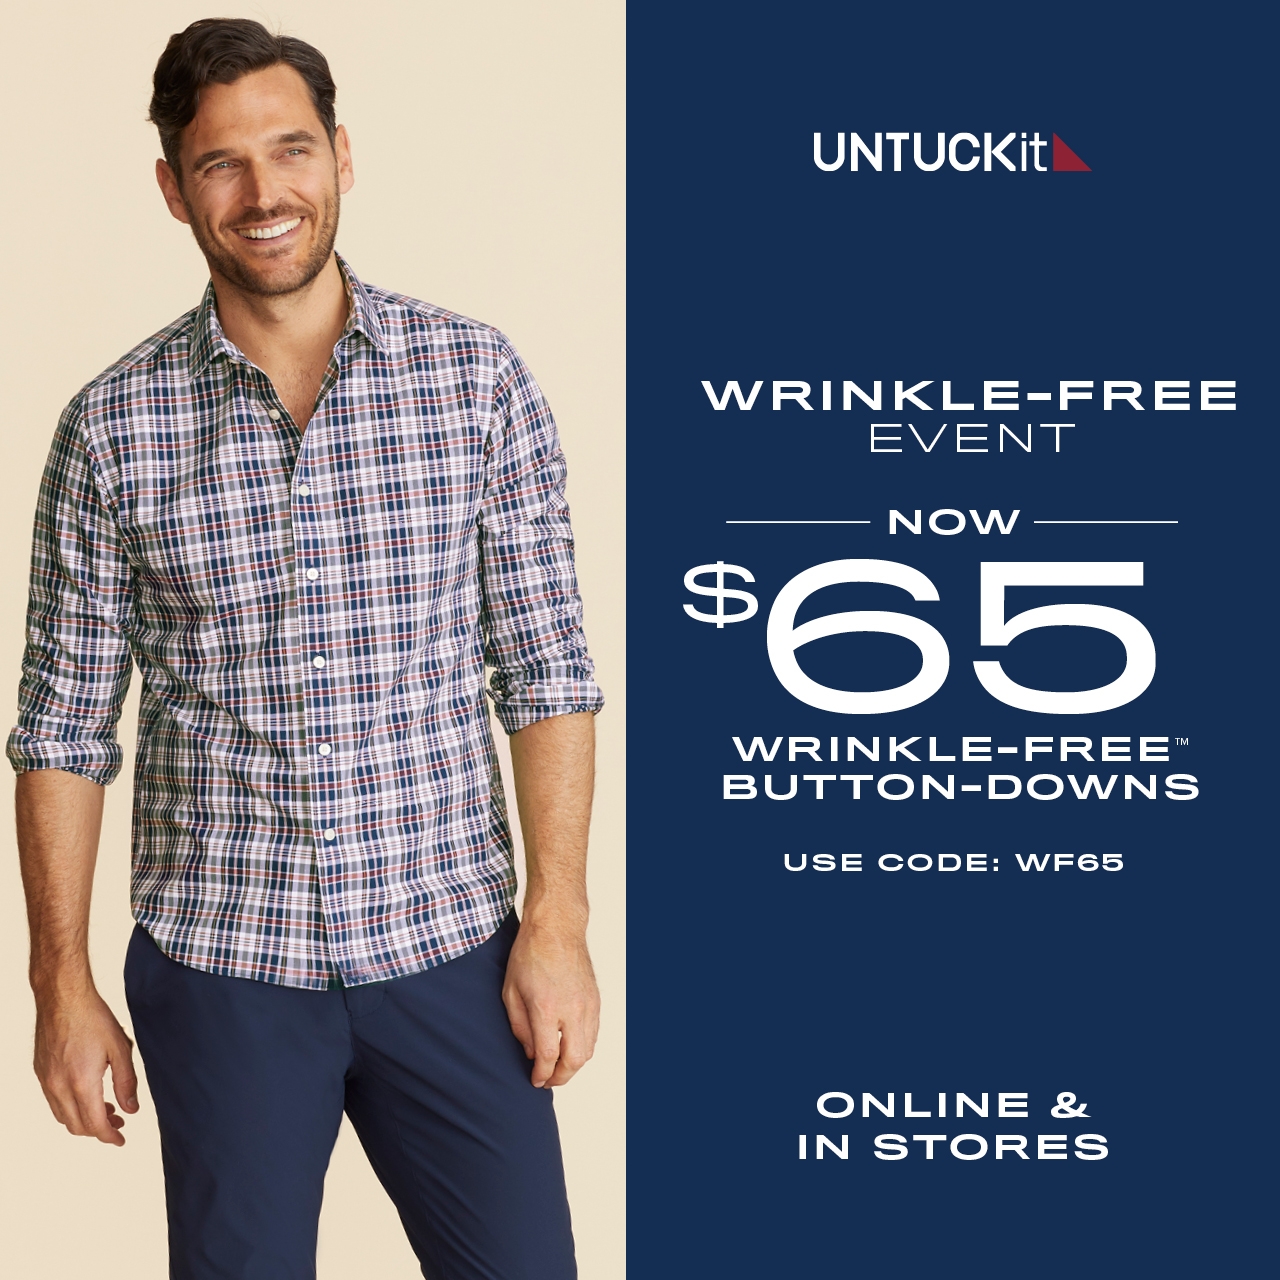 Wrinkle-Free Sale At UNTUCKit - The Bellevue Collection